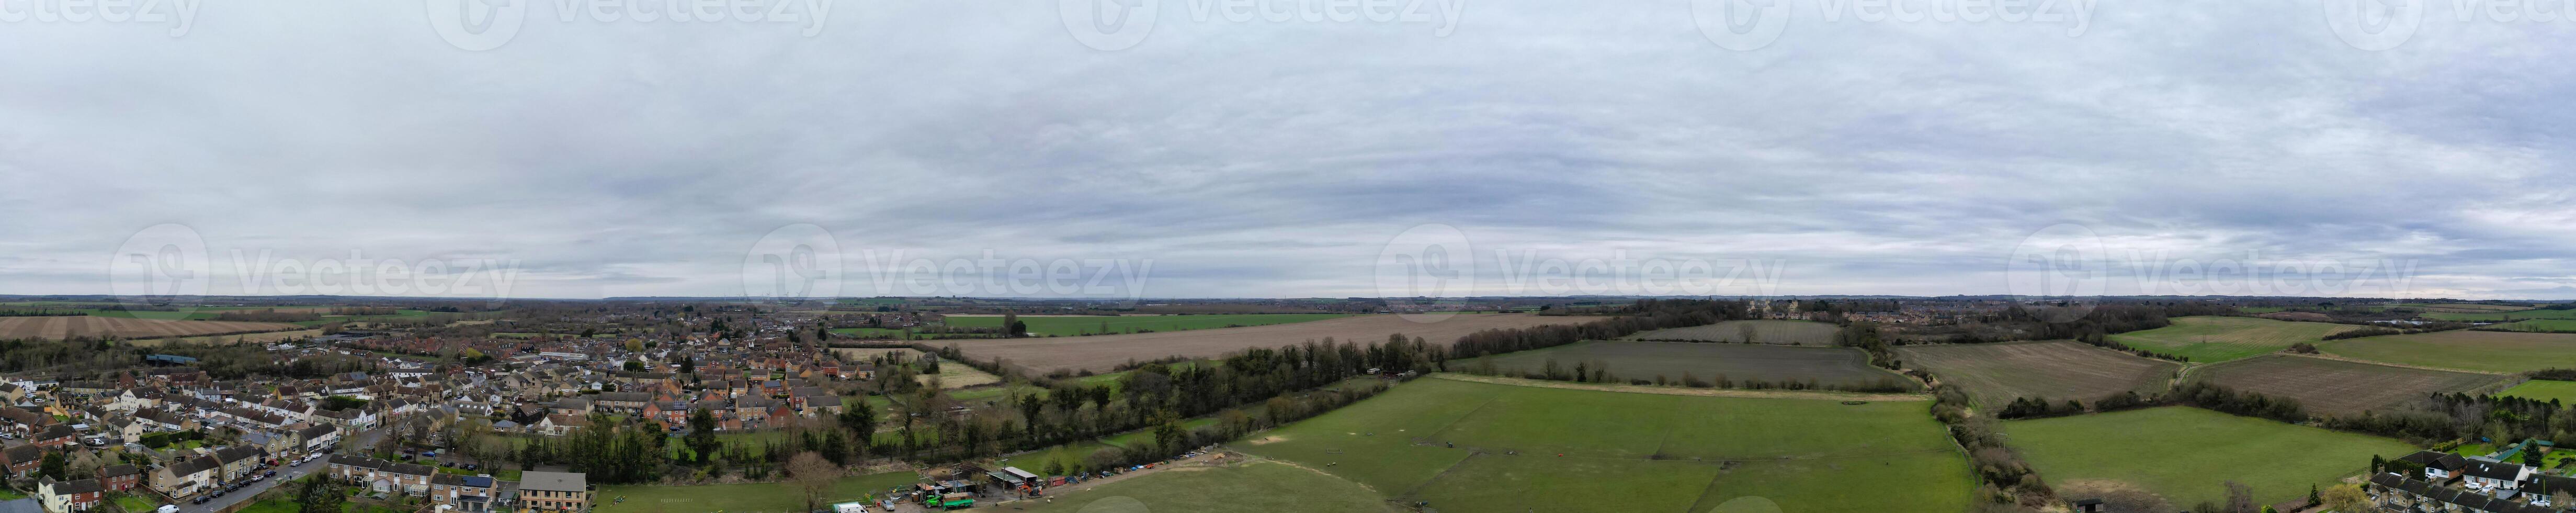 High Angle Panoramic View of Arseley Town of England UK. The Footage Was Captured During Cloudy and Rainy Day of Feb 28th, 2024 photo